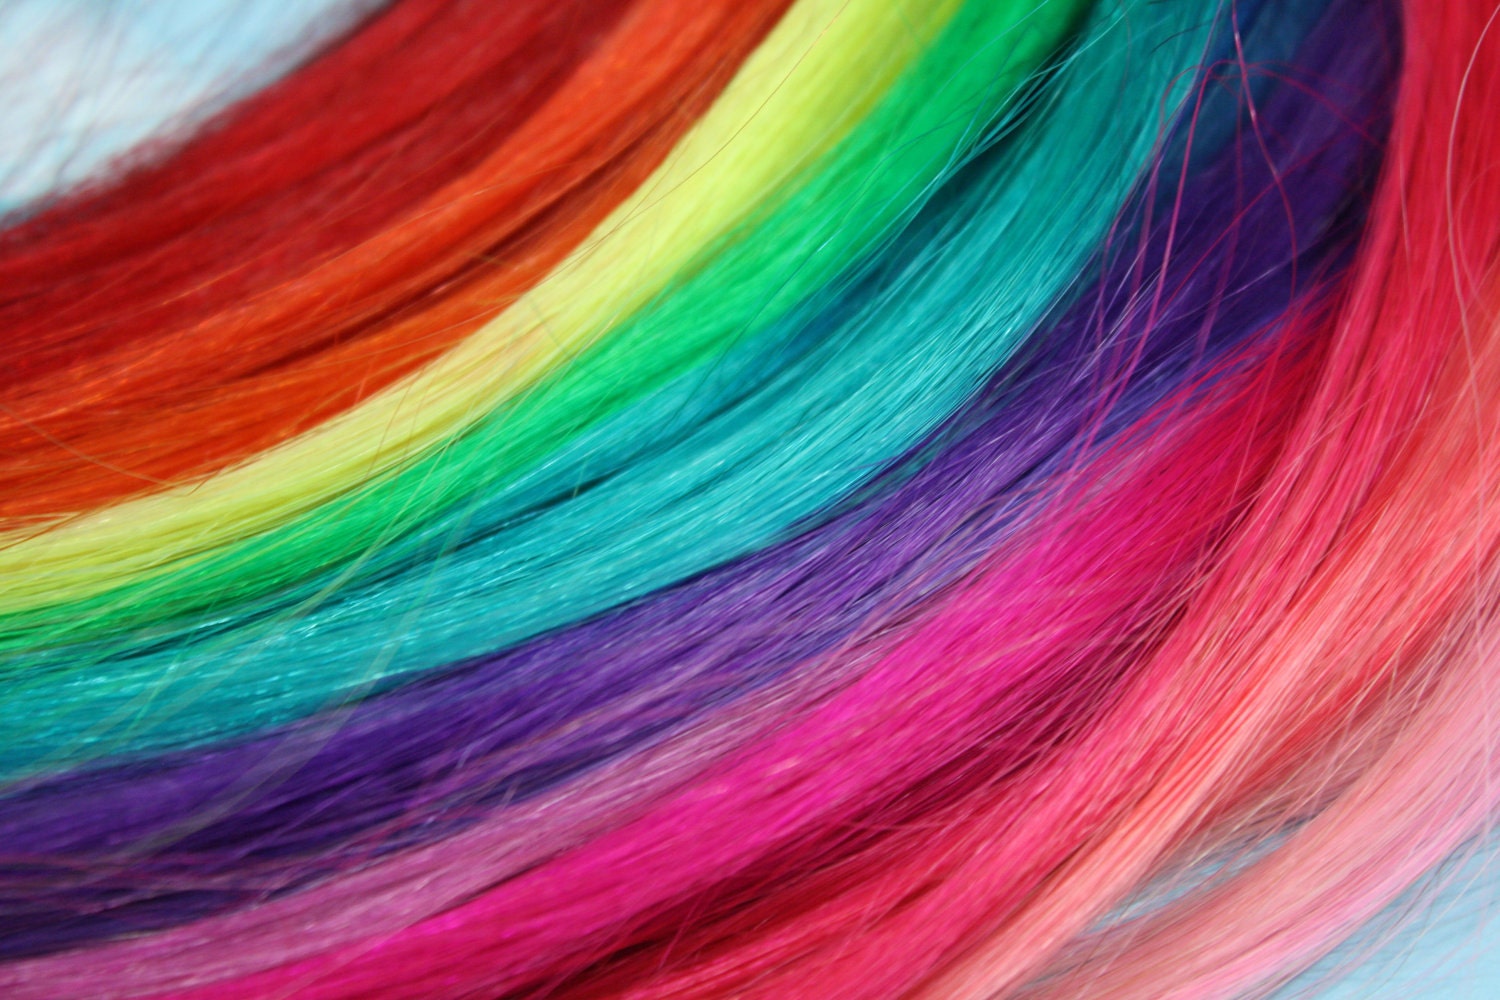 Rainbow Human Hair Extensions Colored Hair Extension Clip BEDECOR Free Coloring Picture wallpaper give a chance to color on the wall without getting in trouble! Fill the walls of your home or office with stress-relieving [bedroomdecorz.blogspot.com]